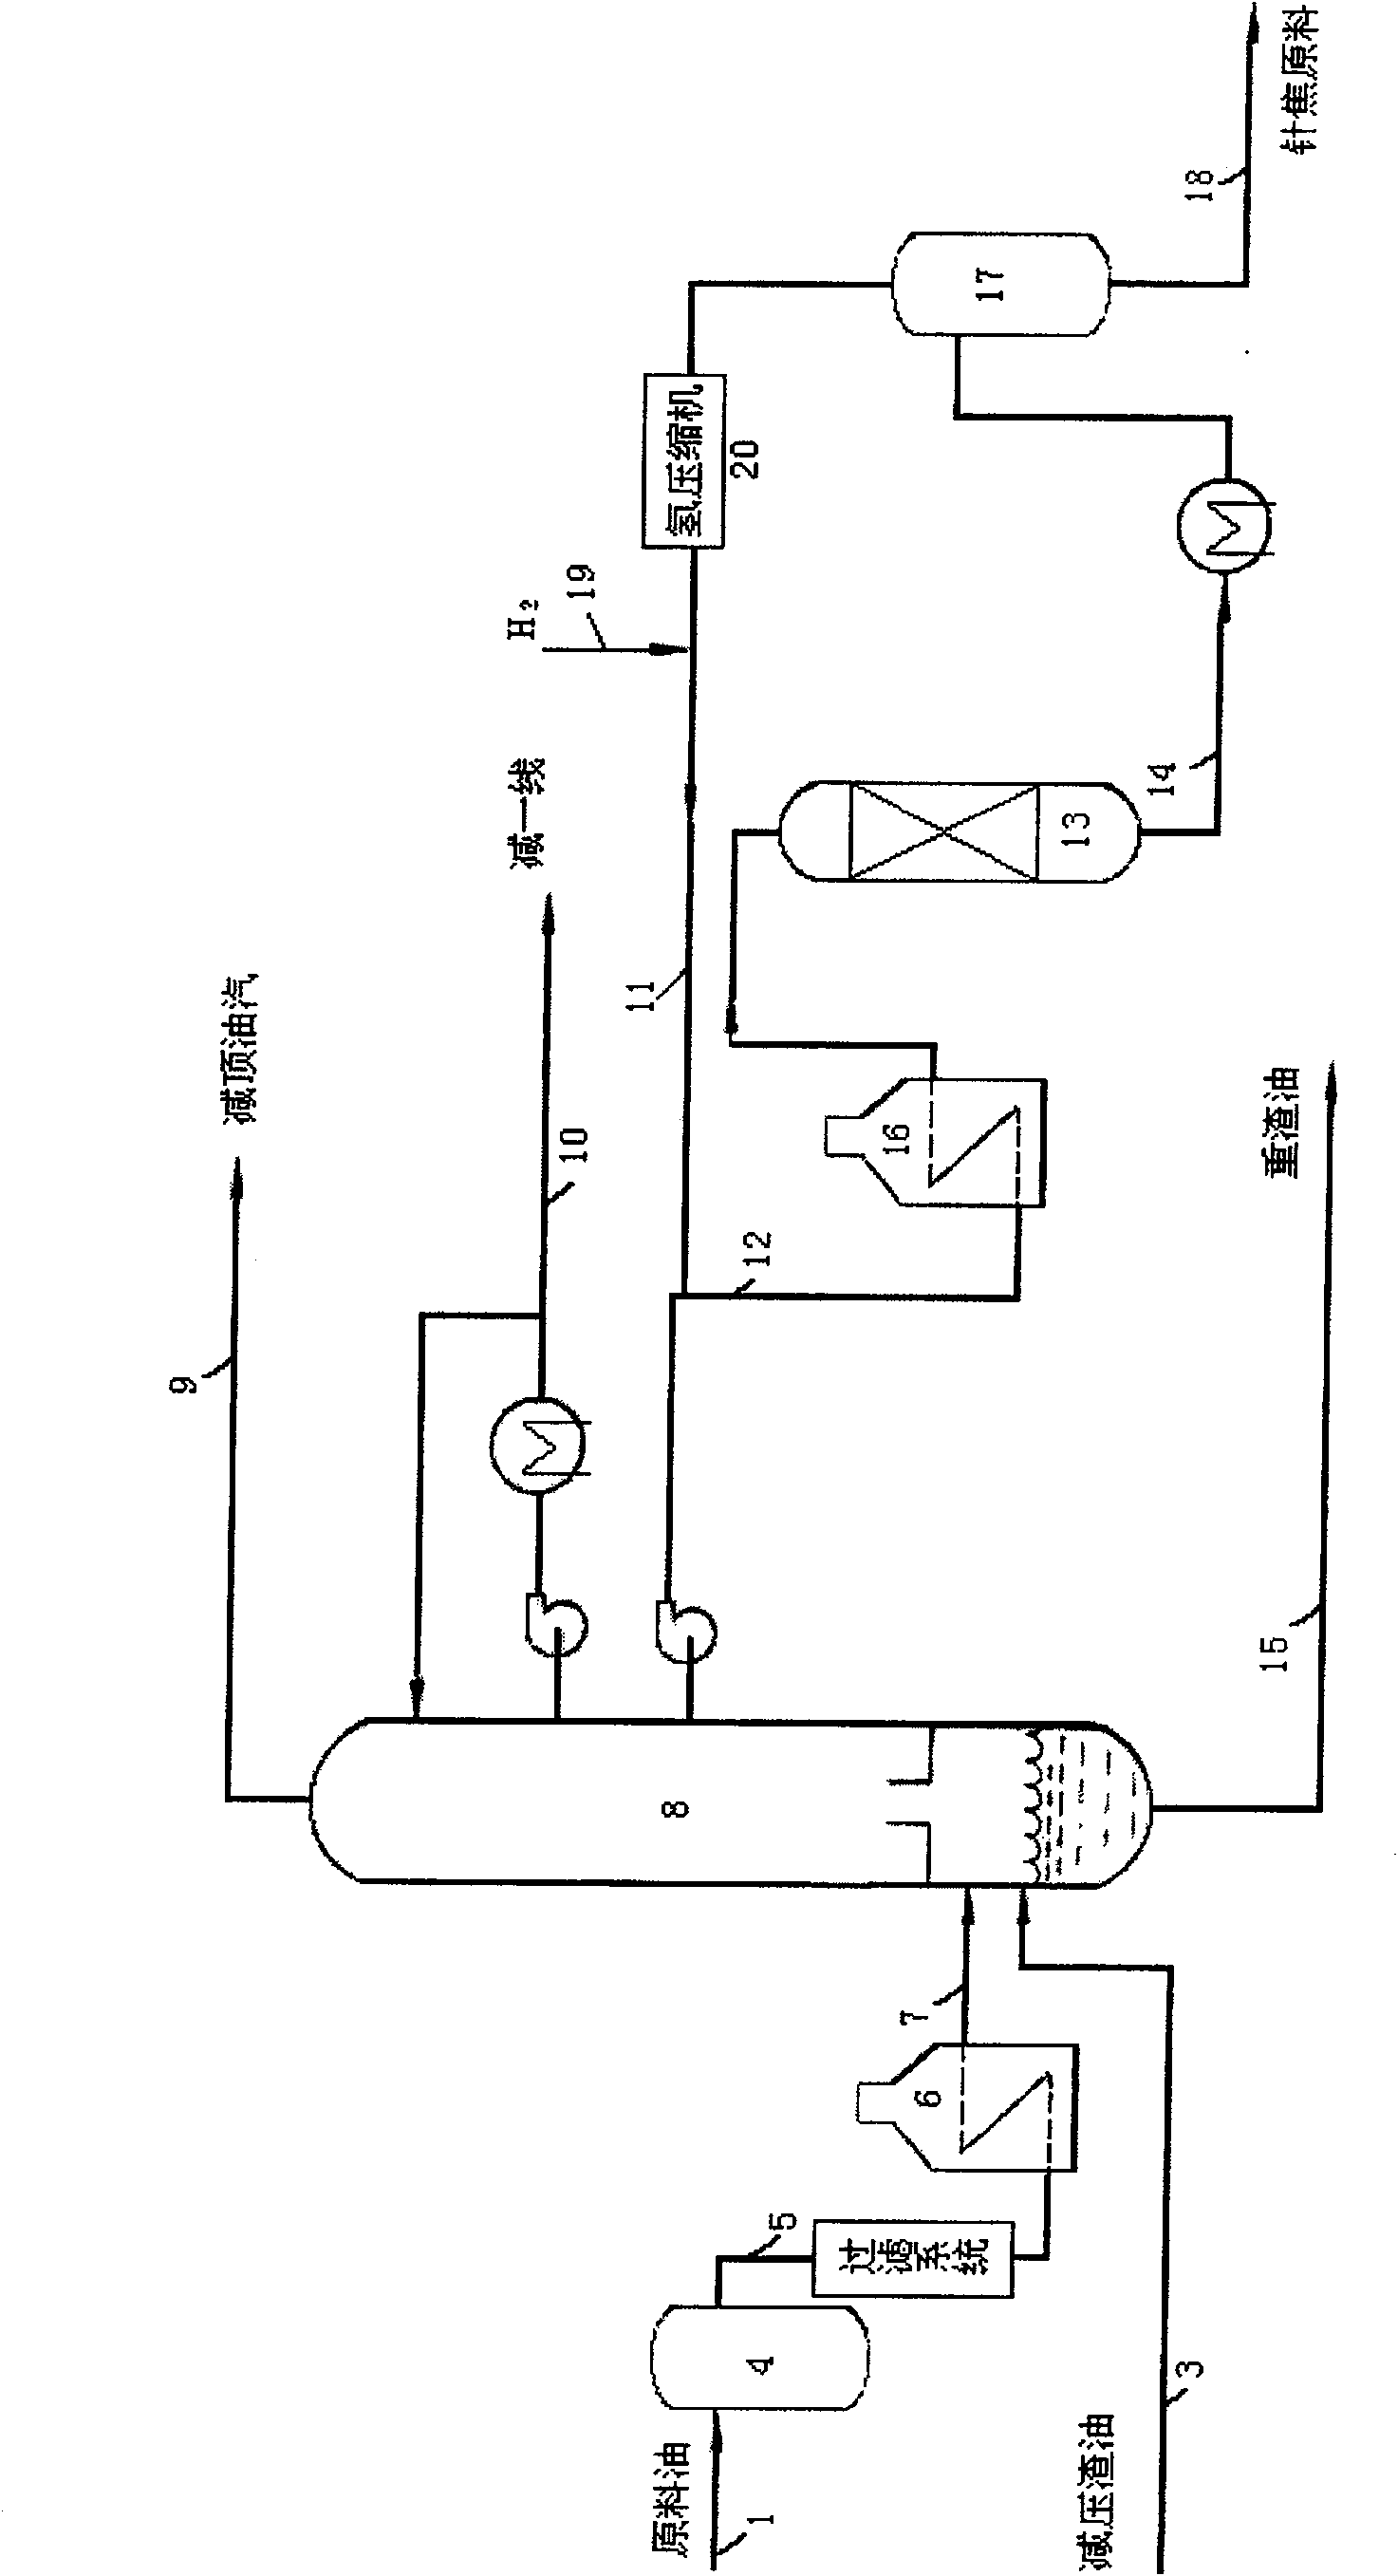 Method of treating raw material for producing acerate coke